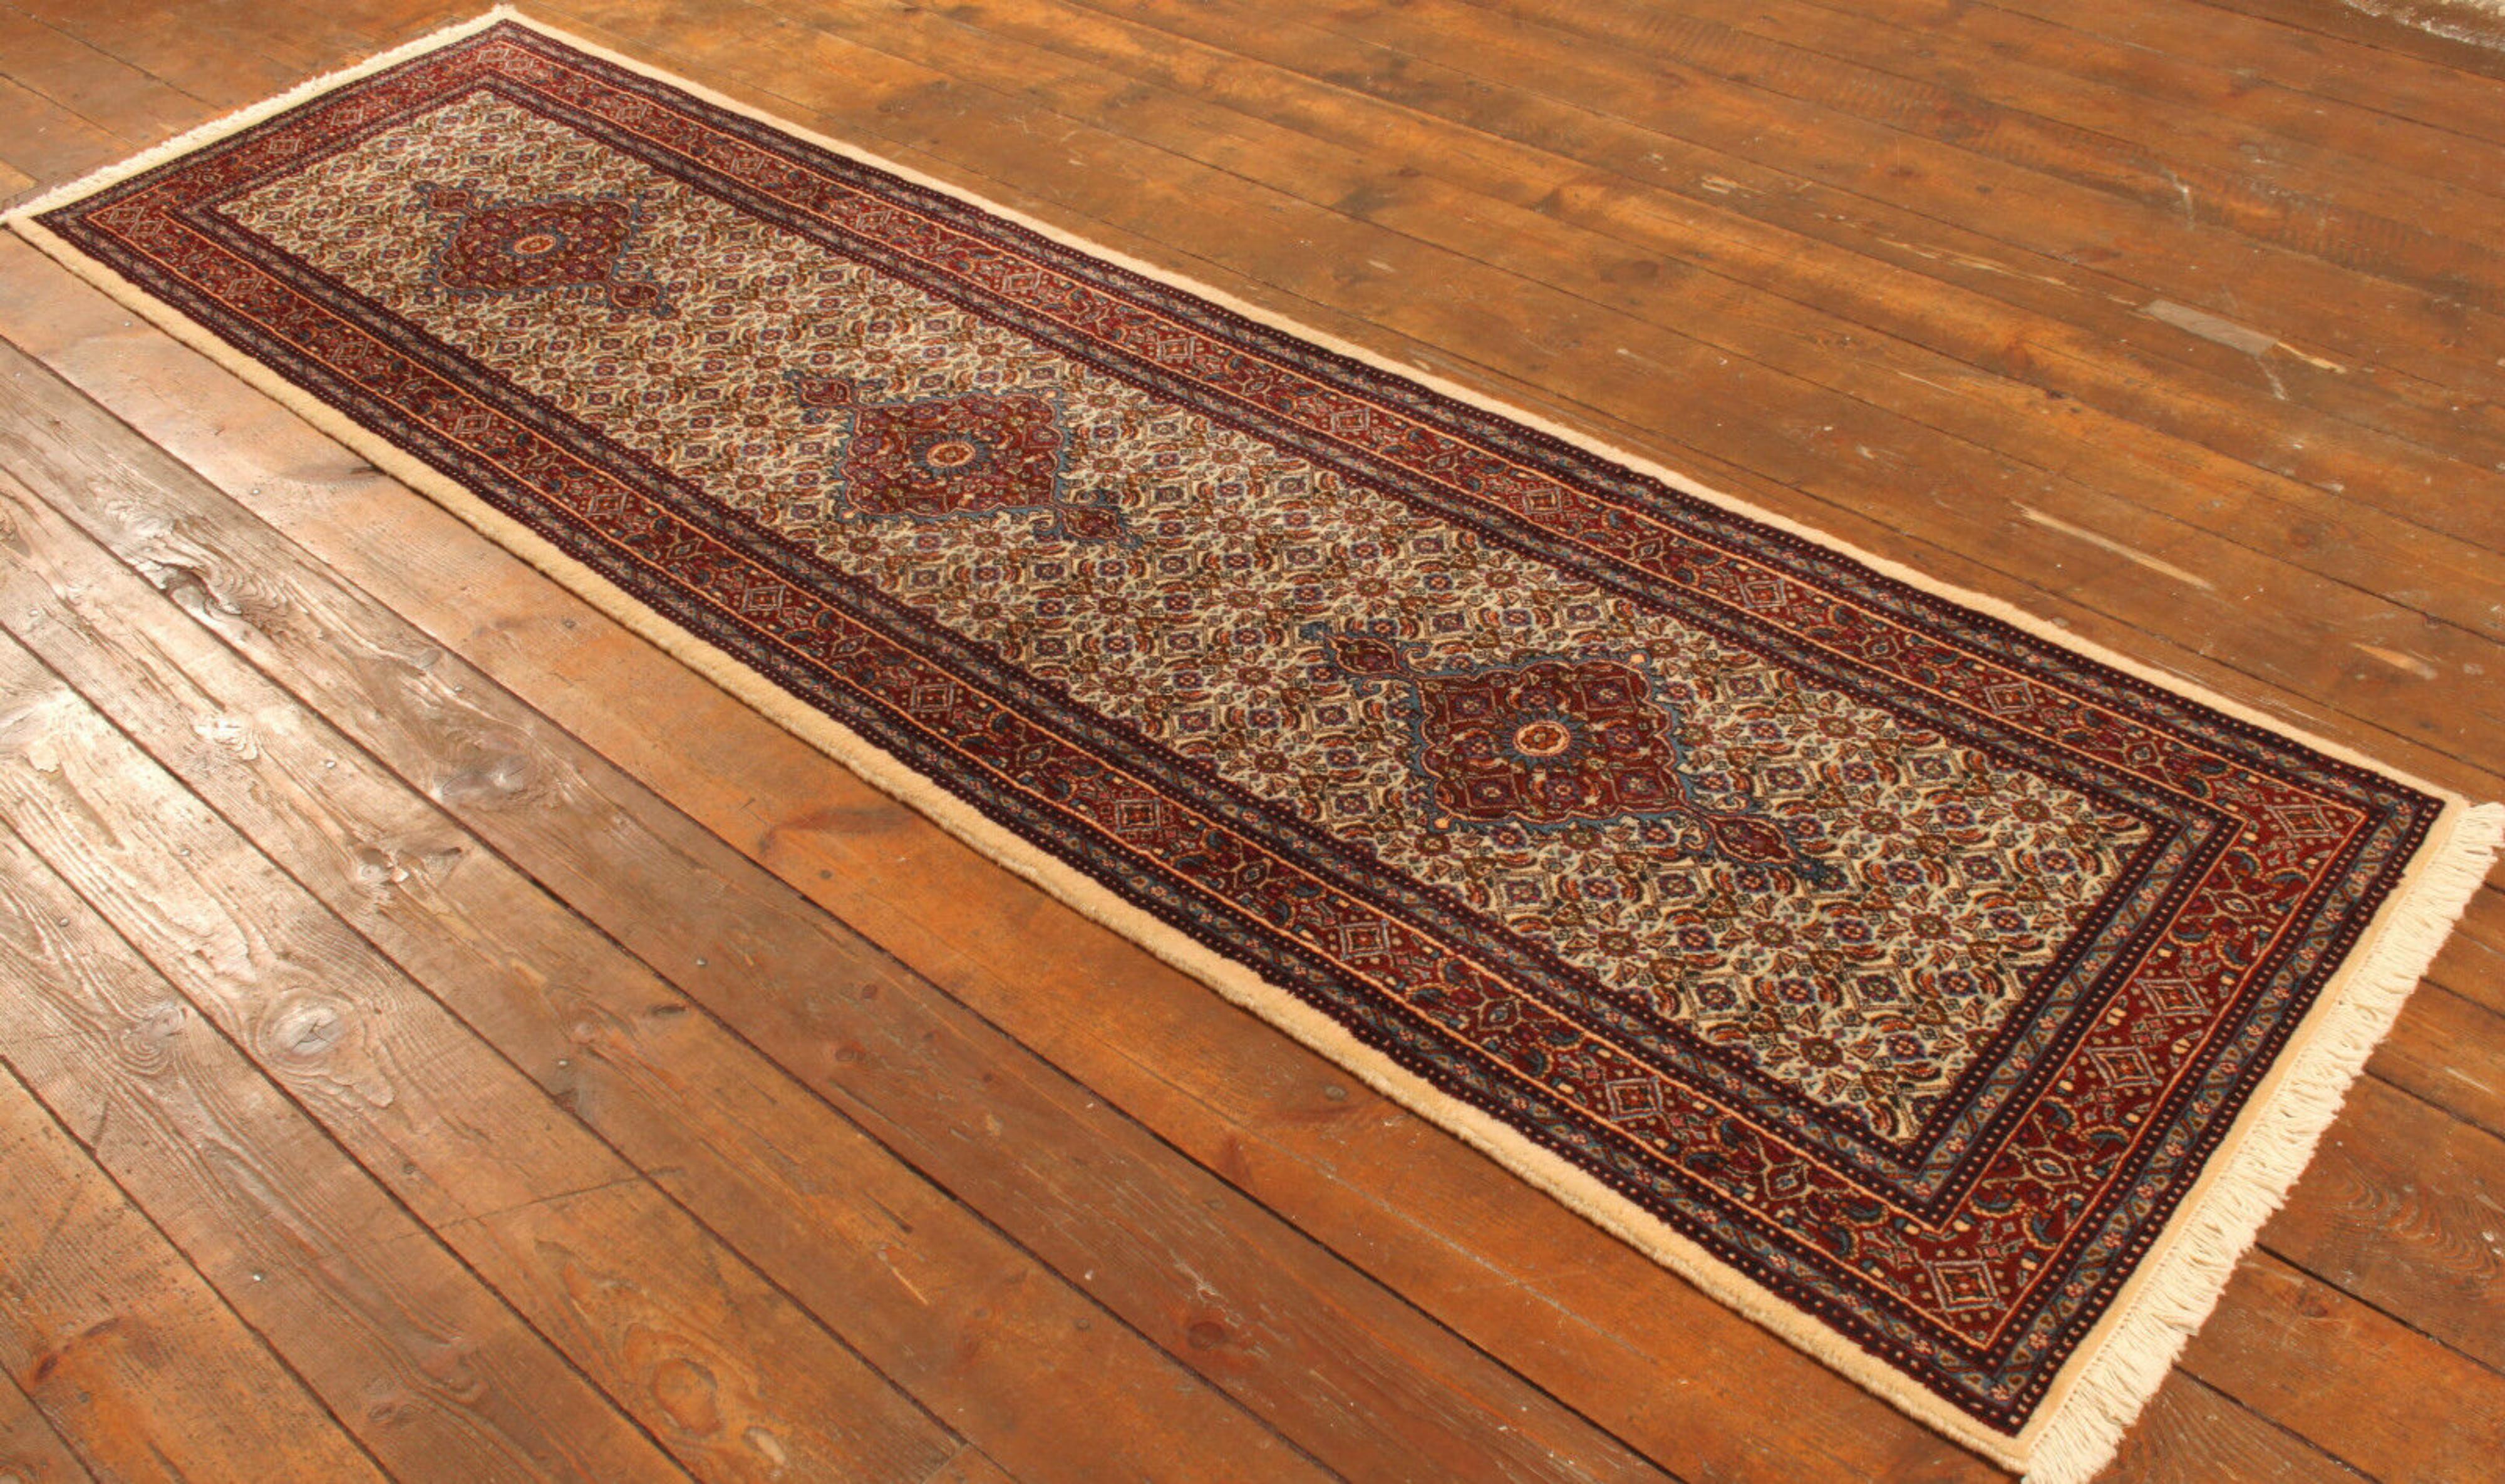 Handmade Vintage Persian Style Moud Runner Rug (2.6’ x 9.6’ / 82cm x 295cm)

Introducing the timeless allure of our Handmade Vintage Persian Style Moud Runner Rug. Originating from the 1980s, this woolen runner rug measures 2.6’ x 9.6’ (82cm x